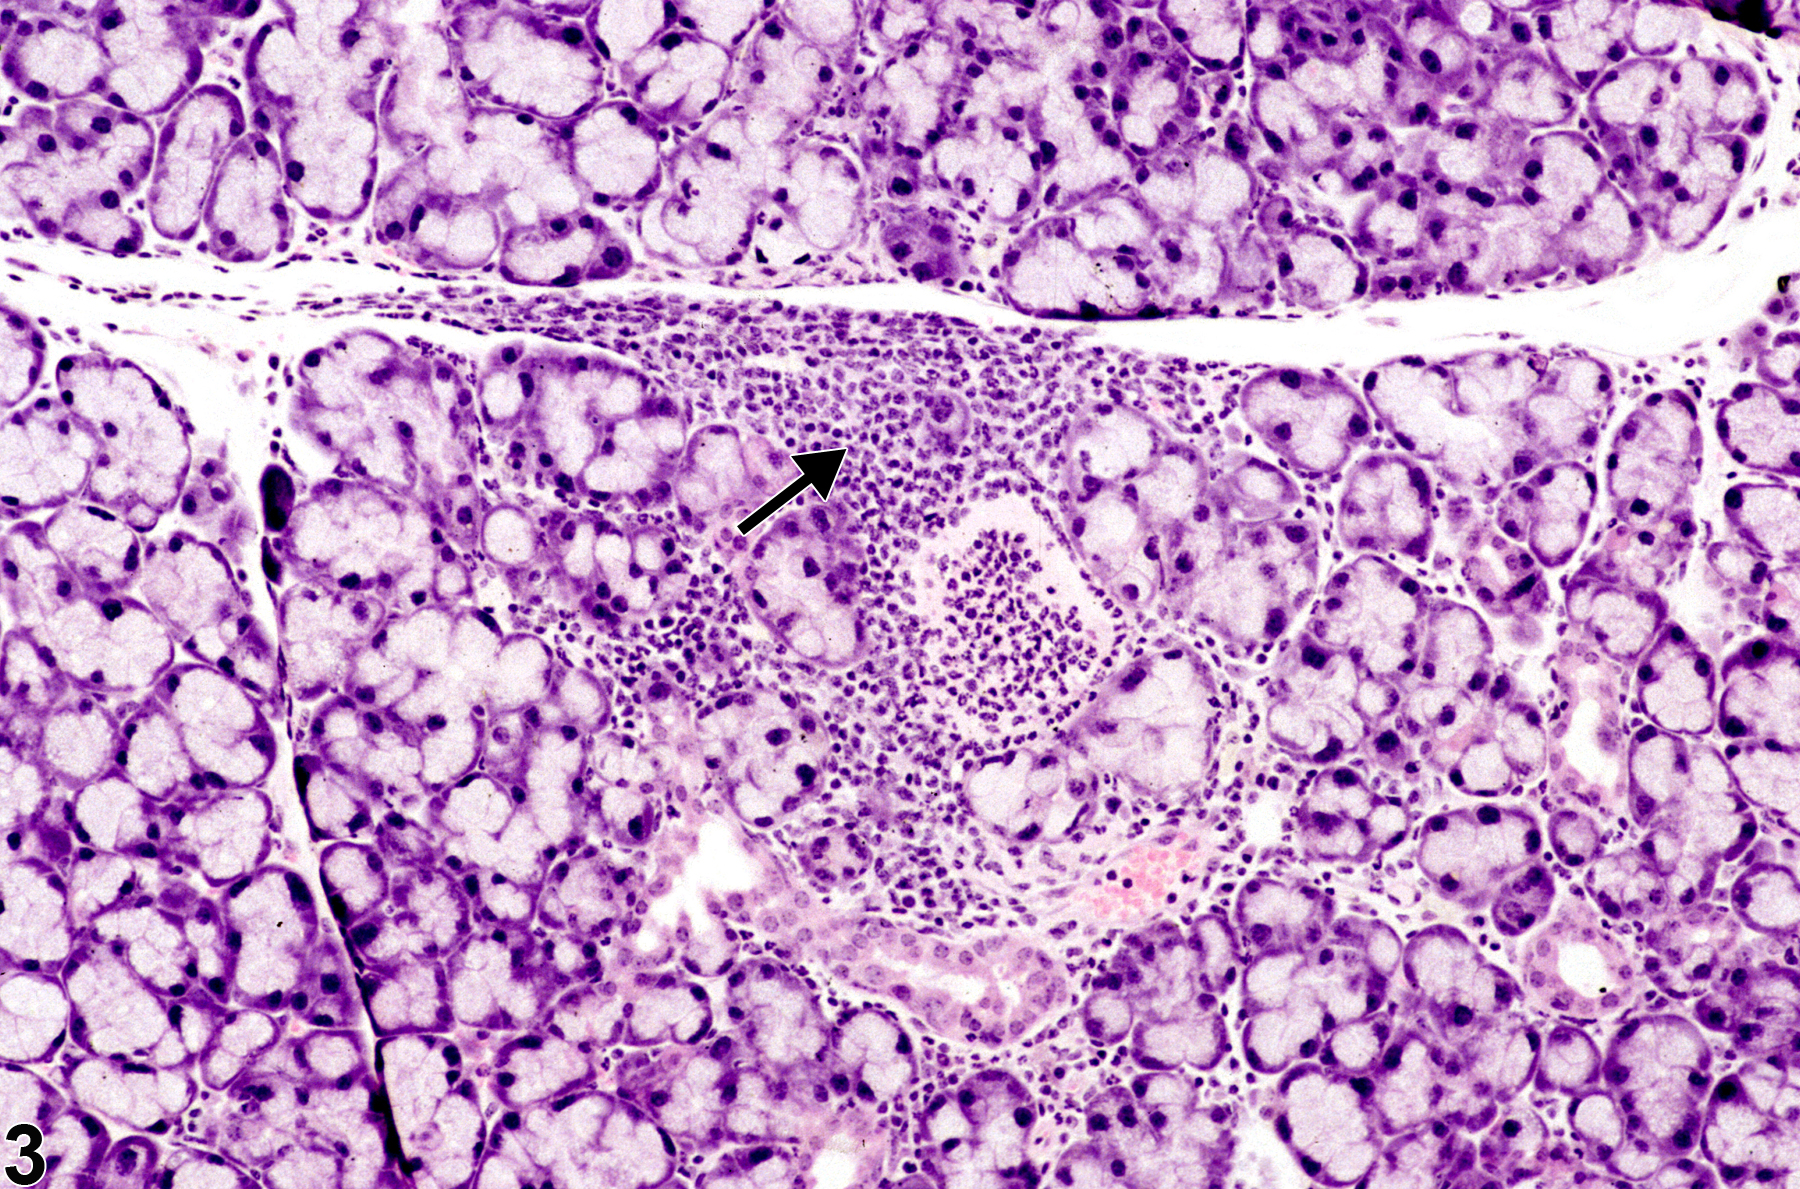 Image of inflammation in the lacrimal gland from a female B6C3F1 mouse in a chronic study